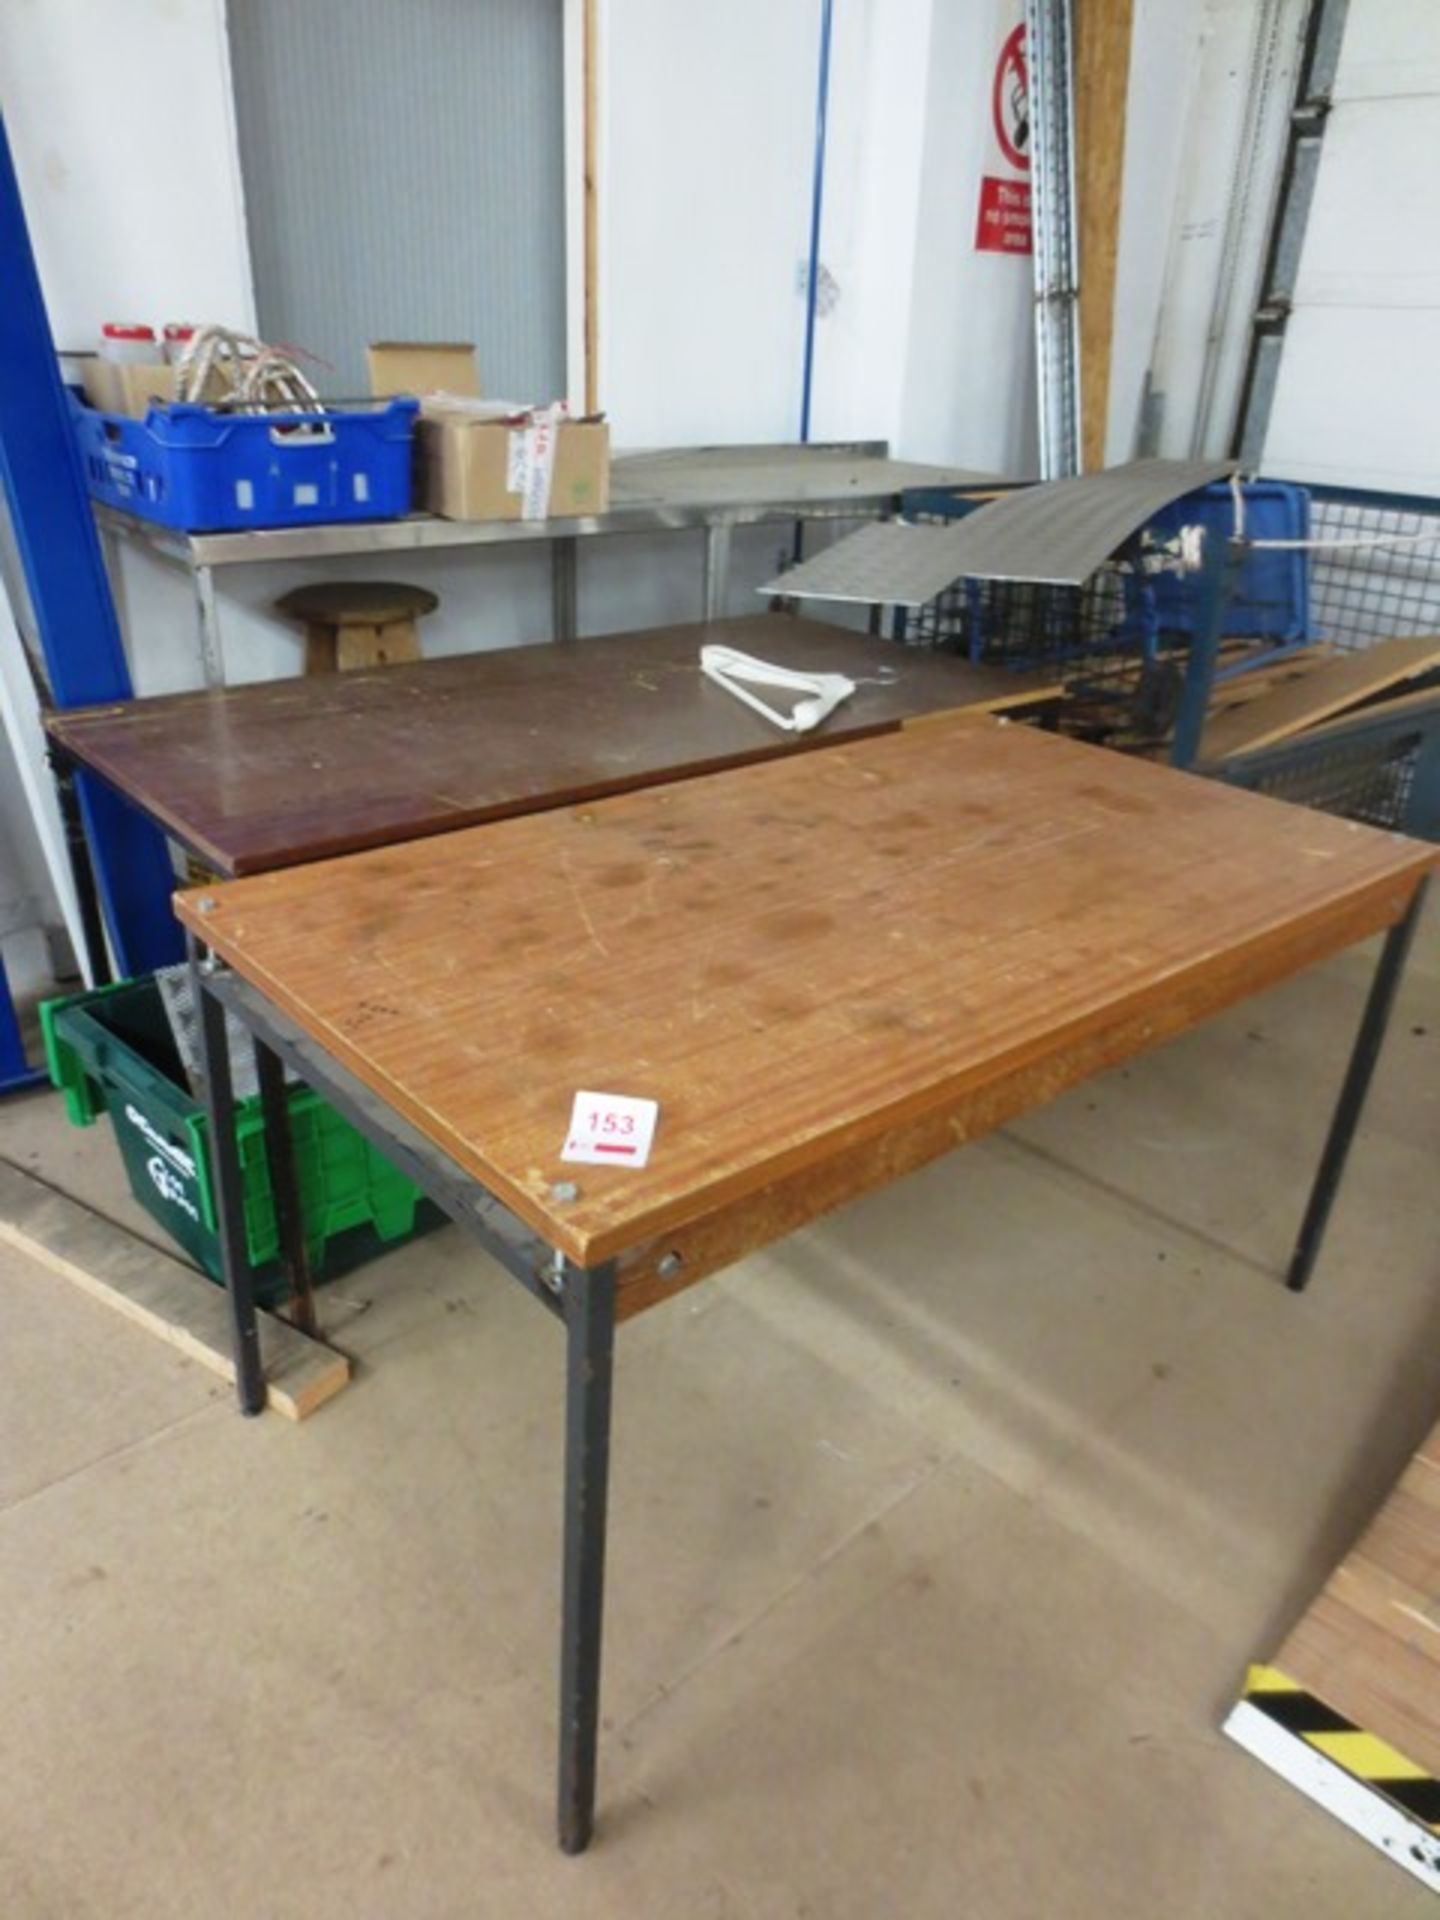 Stainless steel topped steel framed table and two steel framed rectangular tables